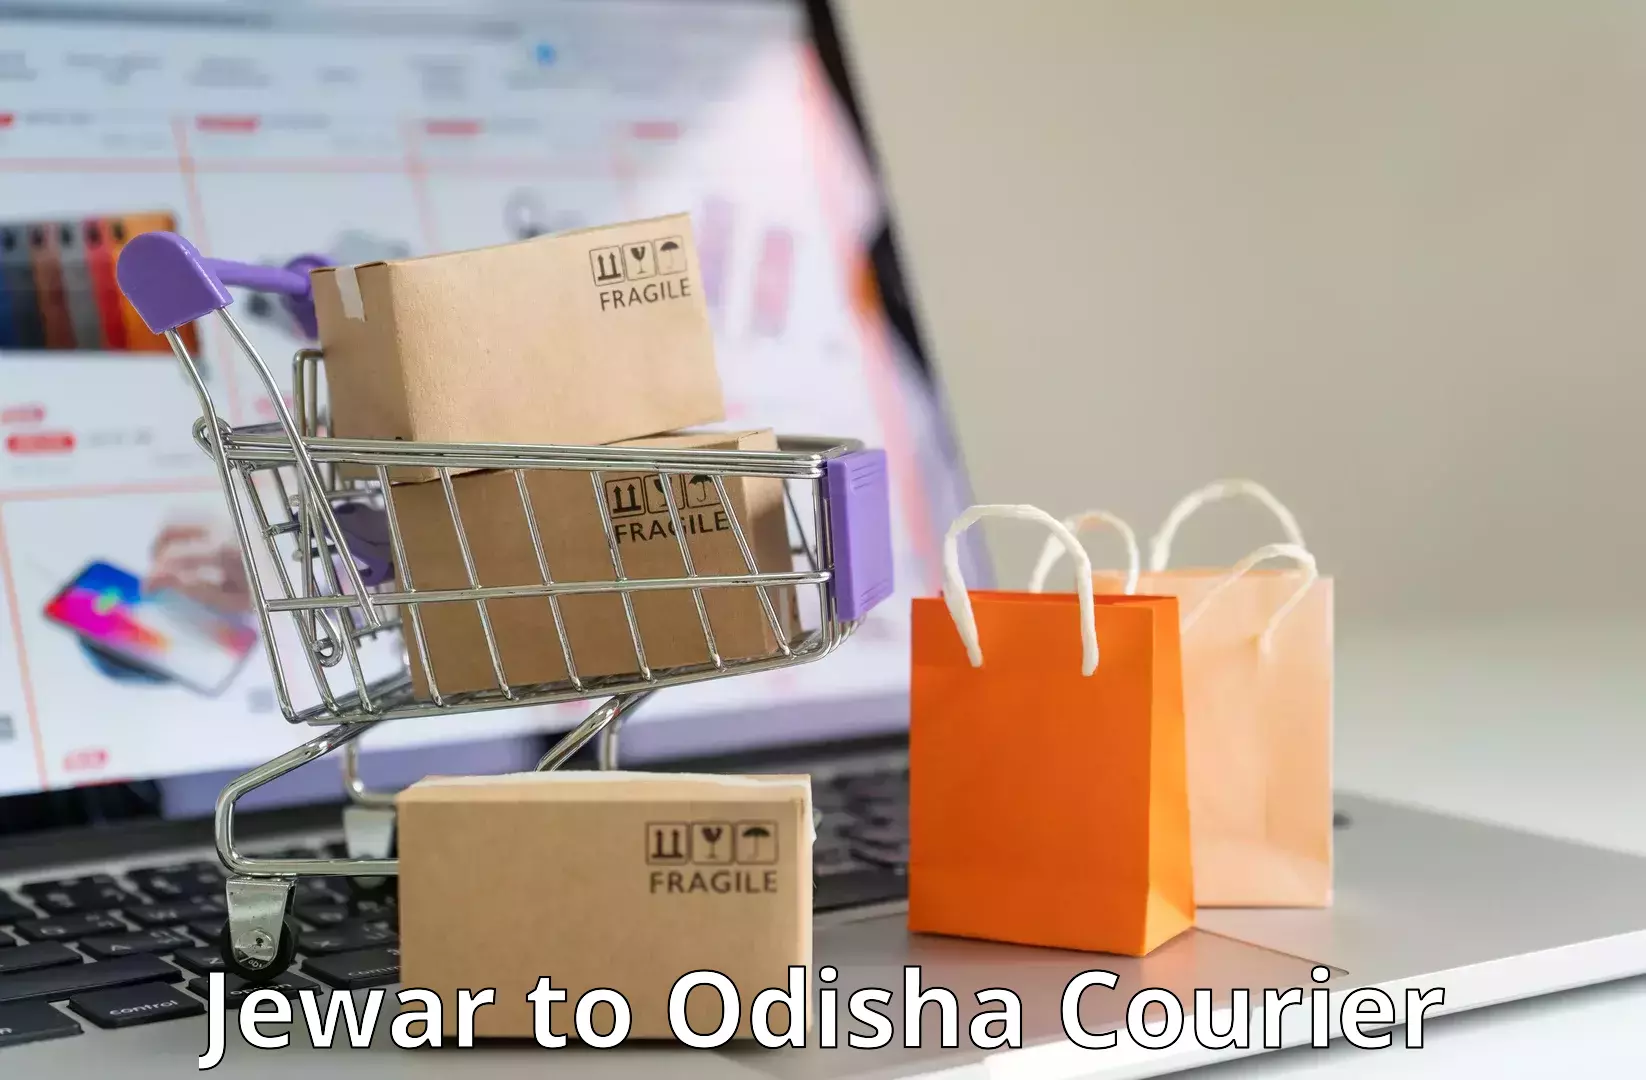 Cost-effective courier solutions Jewar to Baisinga